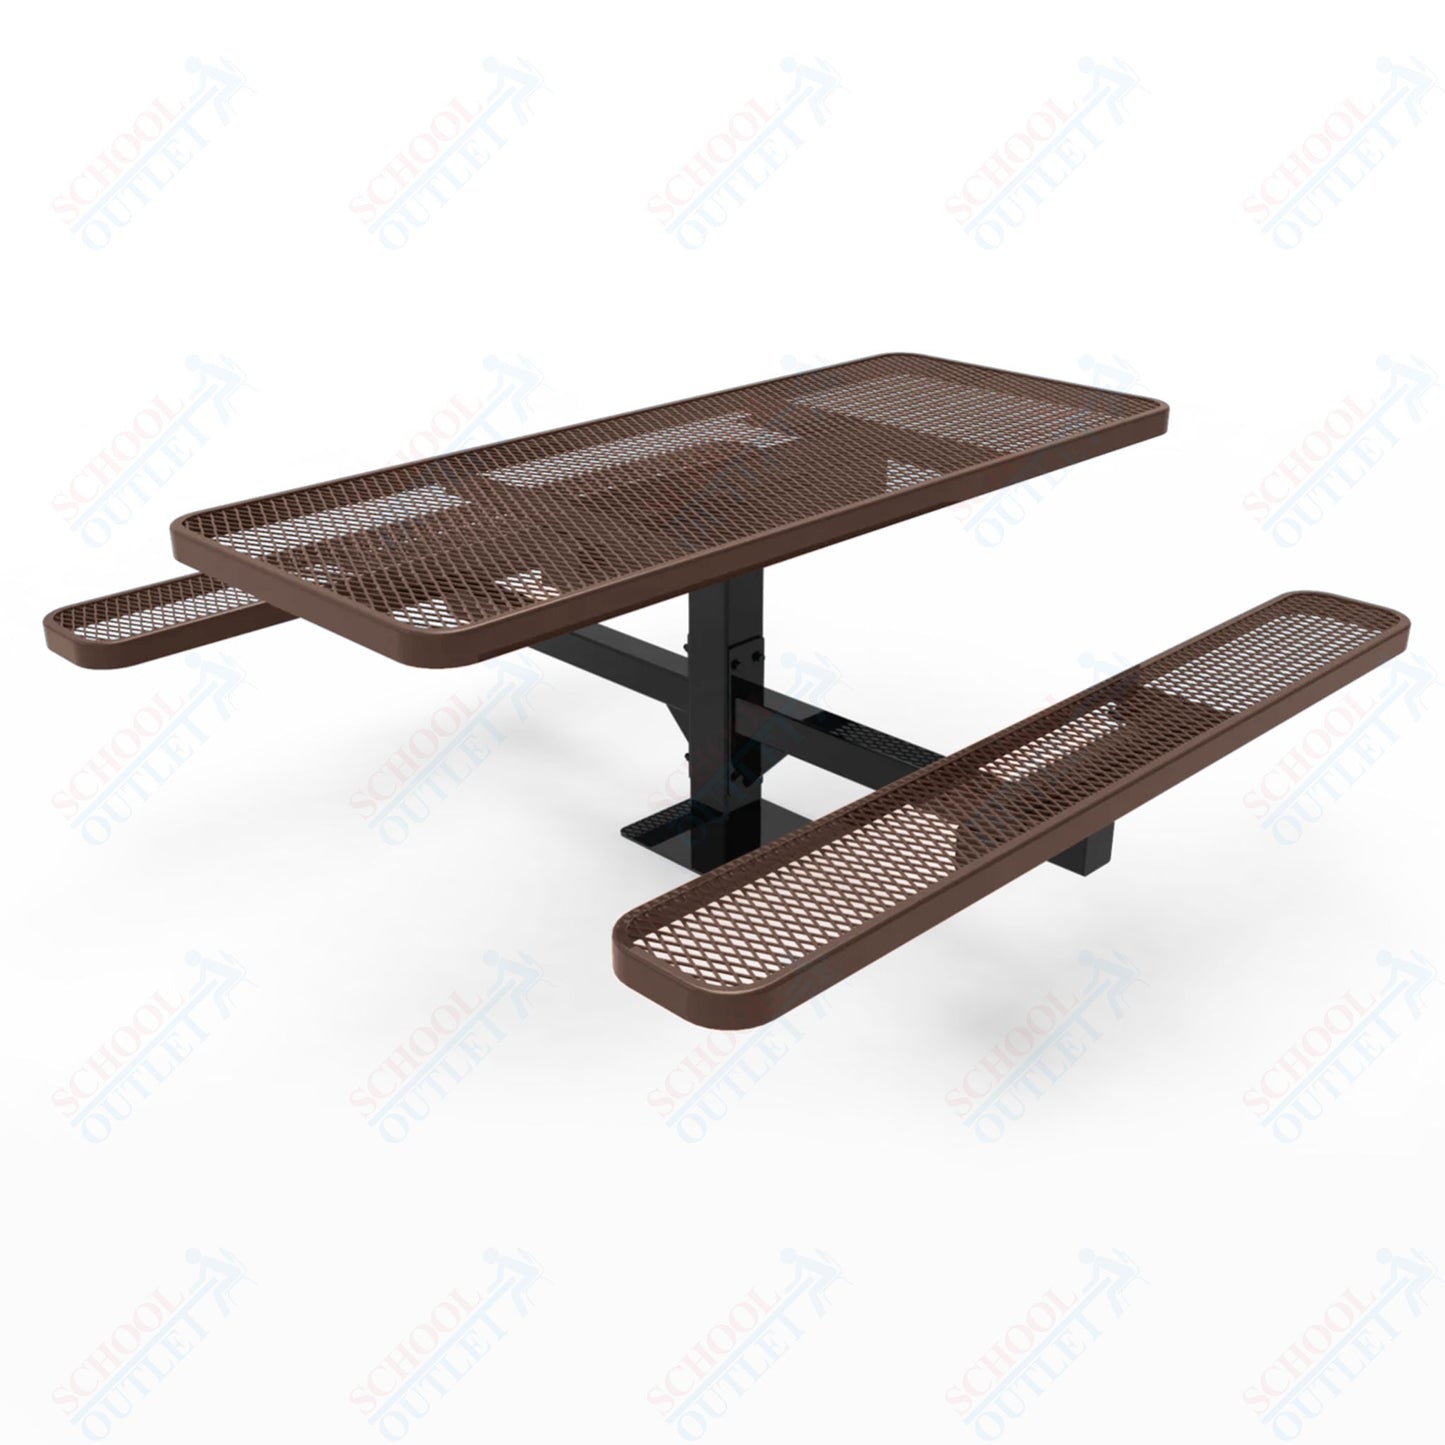 MyTcoat MYT-TRT06-07 6′ Rectangular Pedestal Picnic Table with Surface Mount (72"W x 72.5"D x 30"H)